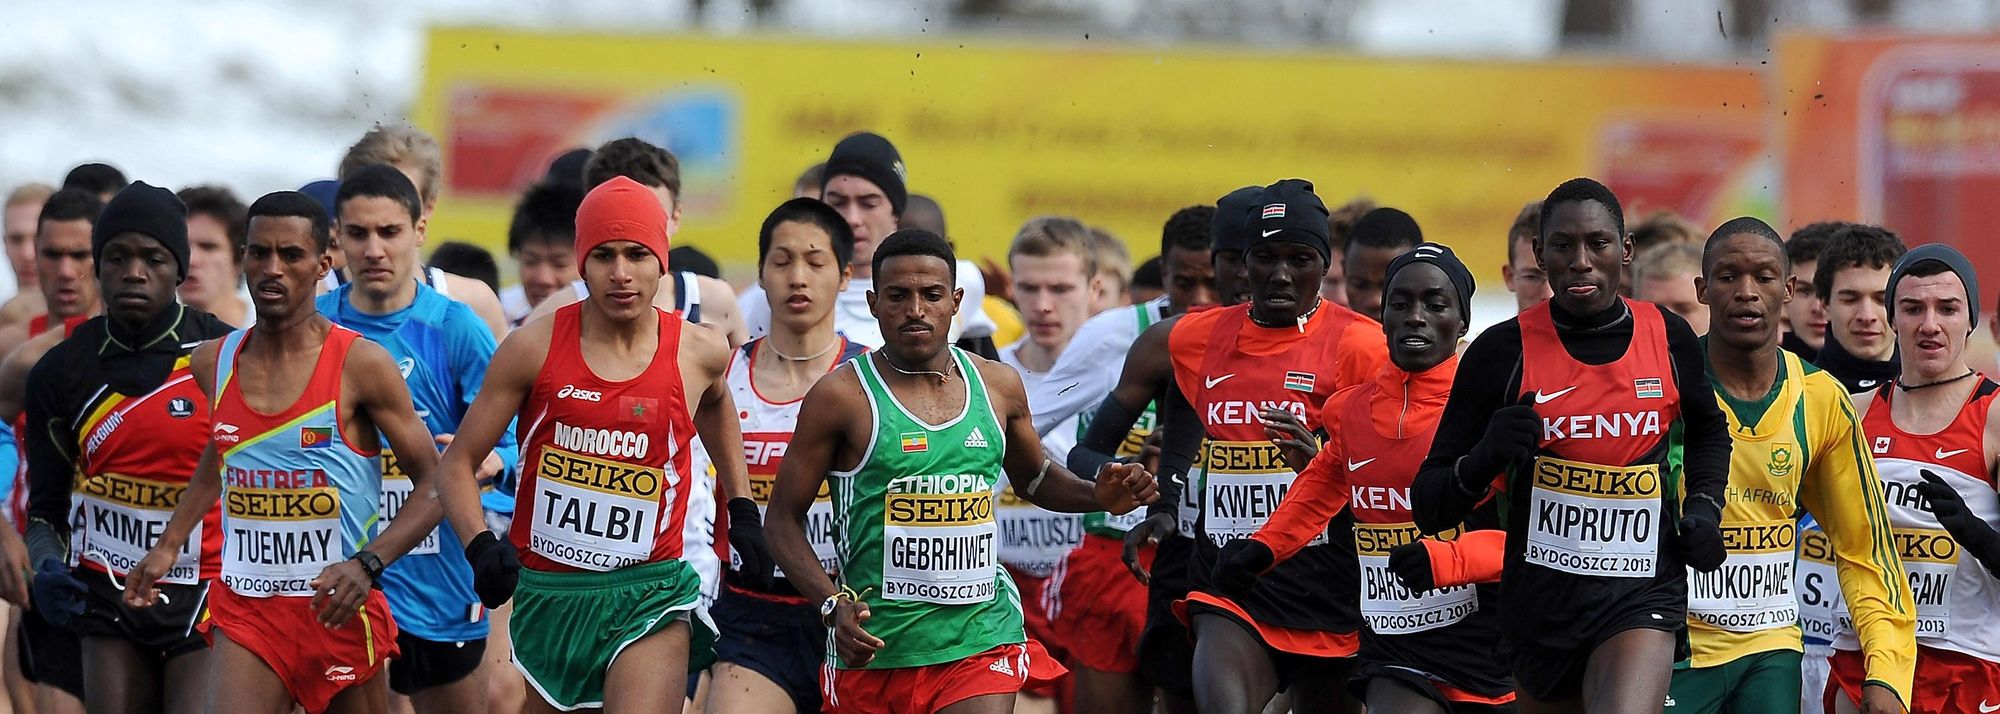 For those members of the media and teams who made it to the 40th IAAF World Cross Country Championships in the Polish city of Bydgoszcz, the detailed analysis provided of the junior men's race provided made jaw-dropping reading on Sunday evening (24).